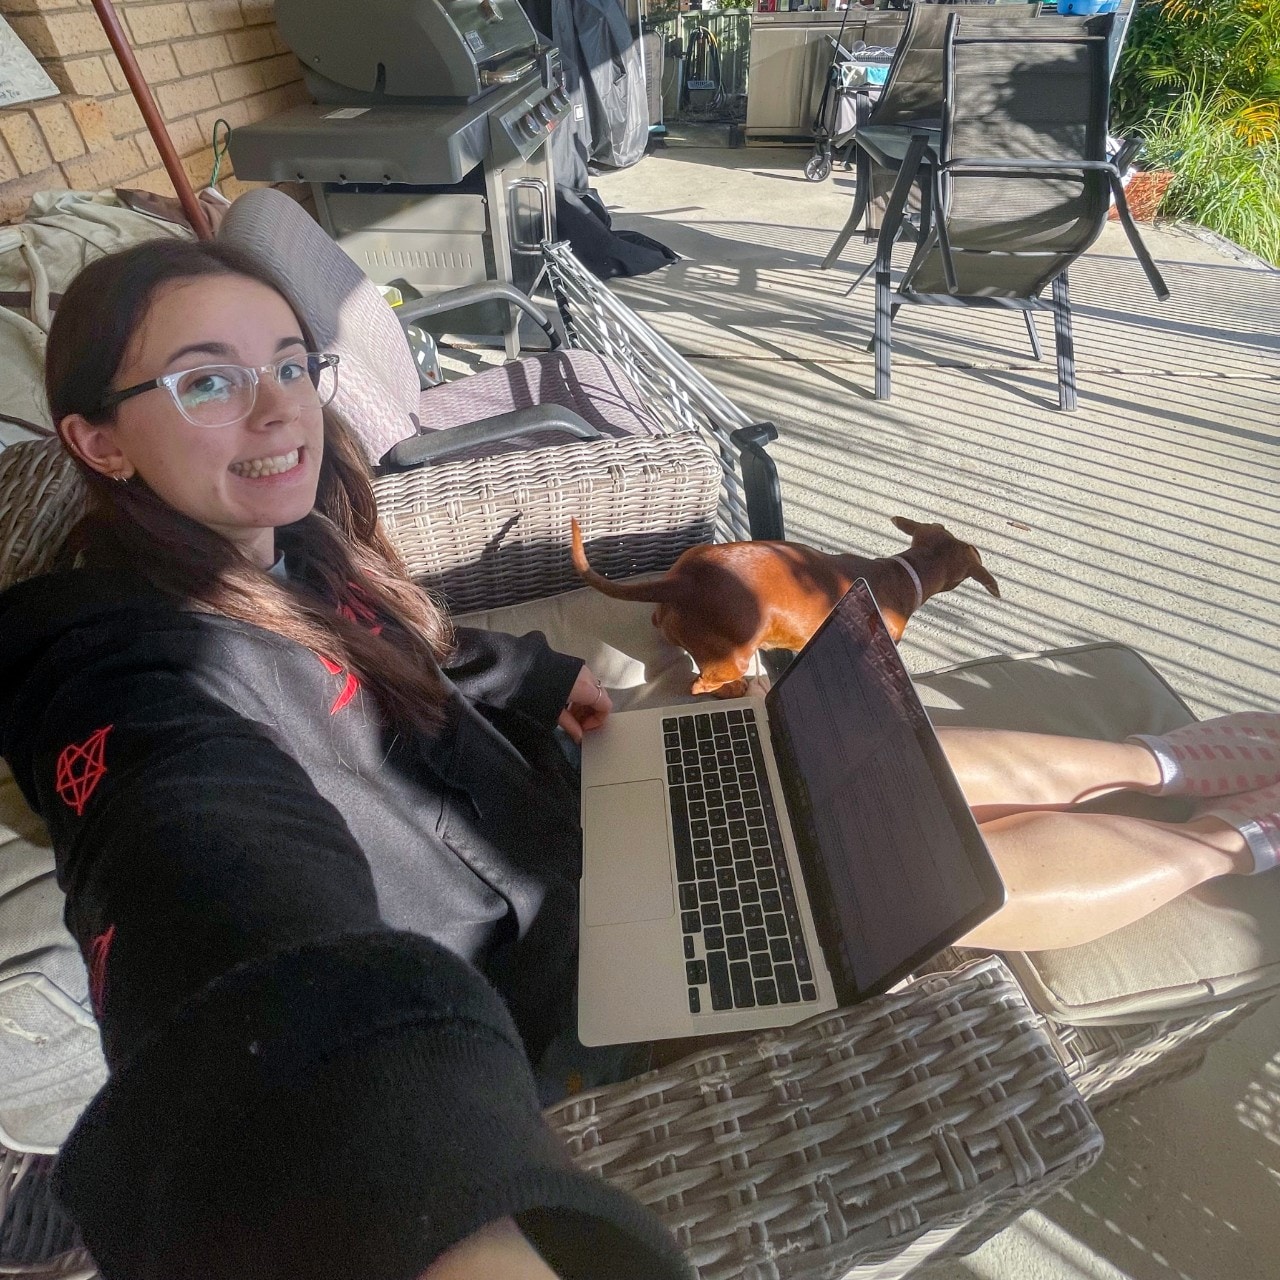 Cameryn Smider sits on a chair on an a deck outside her home with her laptop, smiling at the camera with a dog nearby.